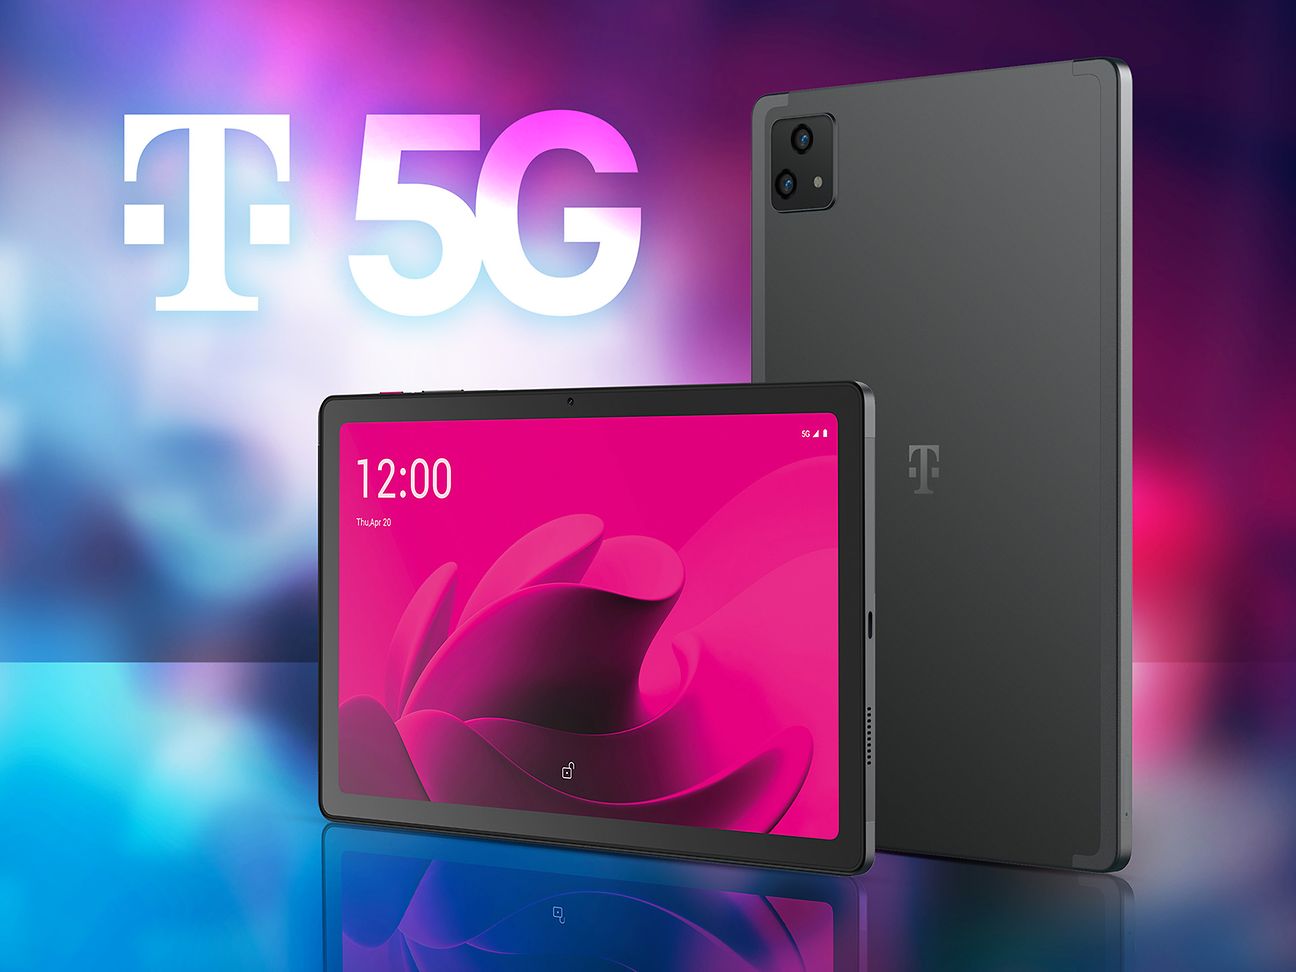 New T Tablet enables 5G access for all